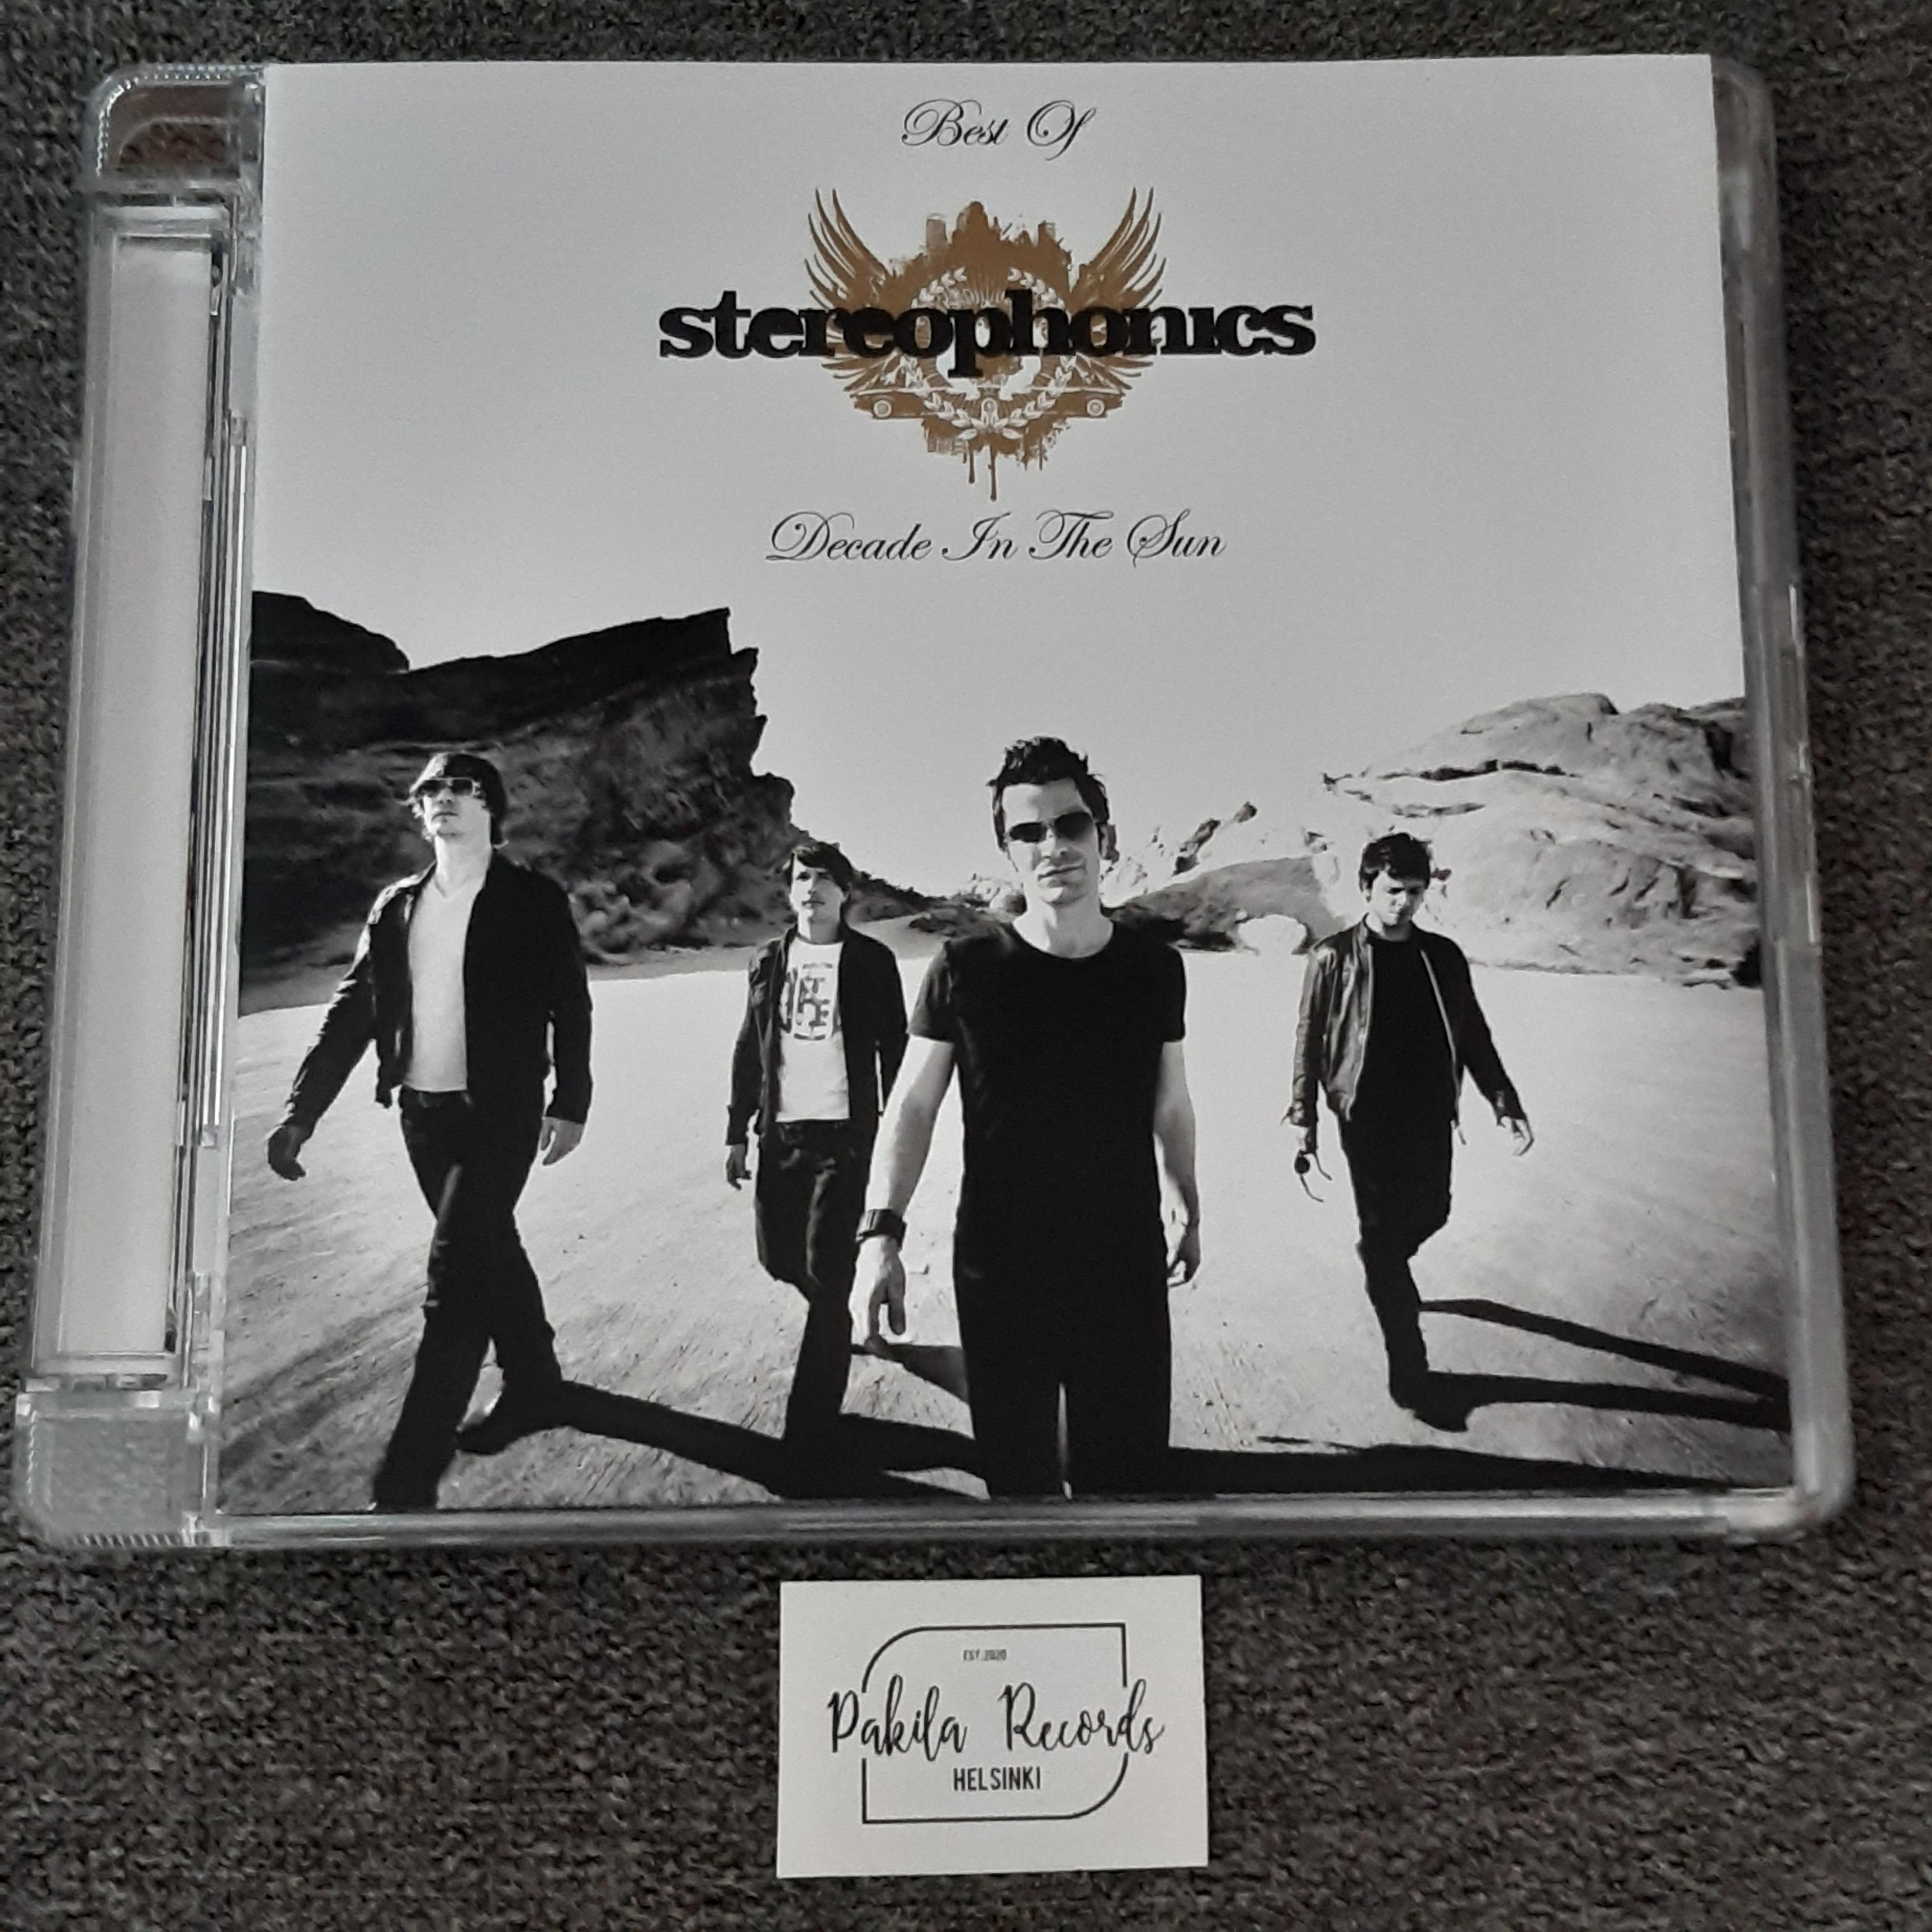 Stereophonics - Decade In The Sun, The Best Of - CD (käytetty)